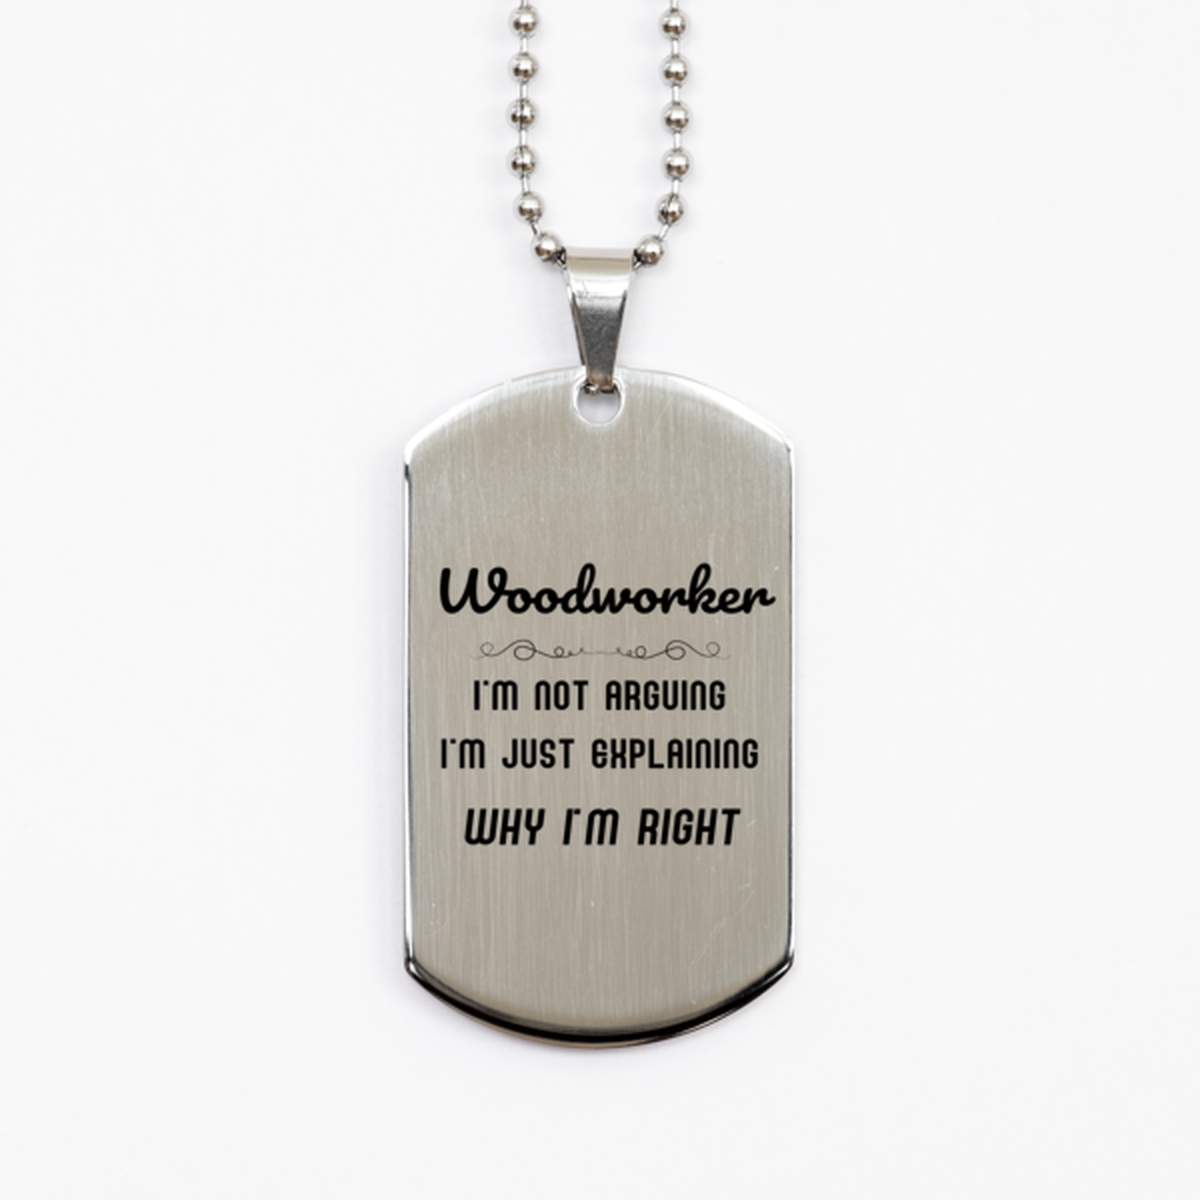 Woodworker I'm not Arguing. I'm Just Explaining Why I'm RIGHT Silver Dog Tag, Funny Saying Quote Woodworker Gifts For Woodworker Graduation Birthday Christmas Gifts for Men Women Coworker